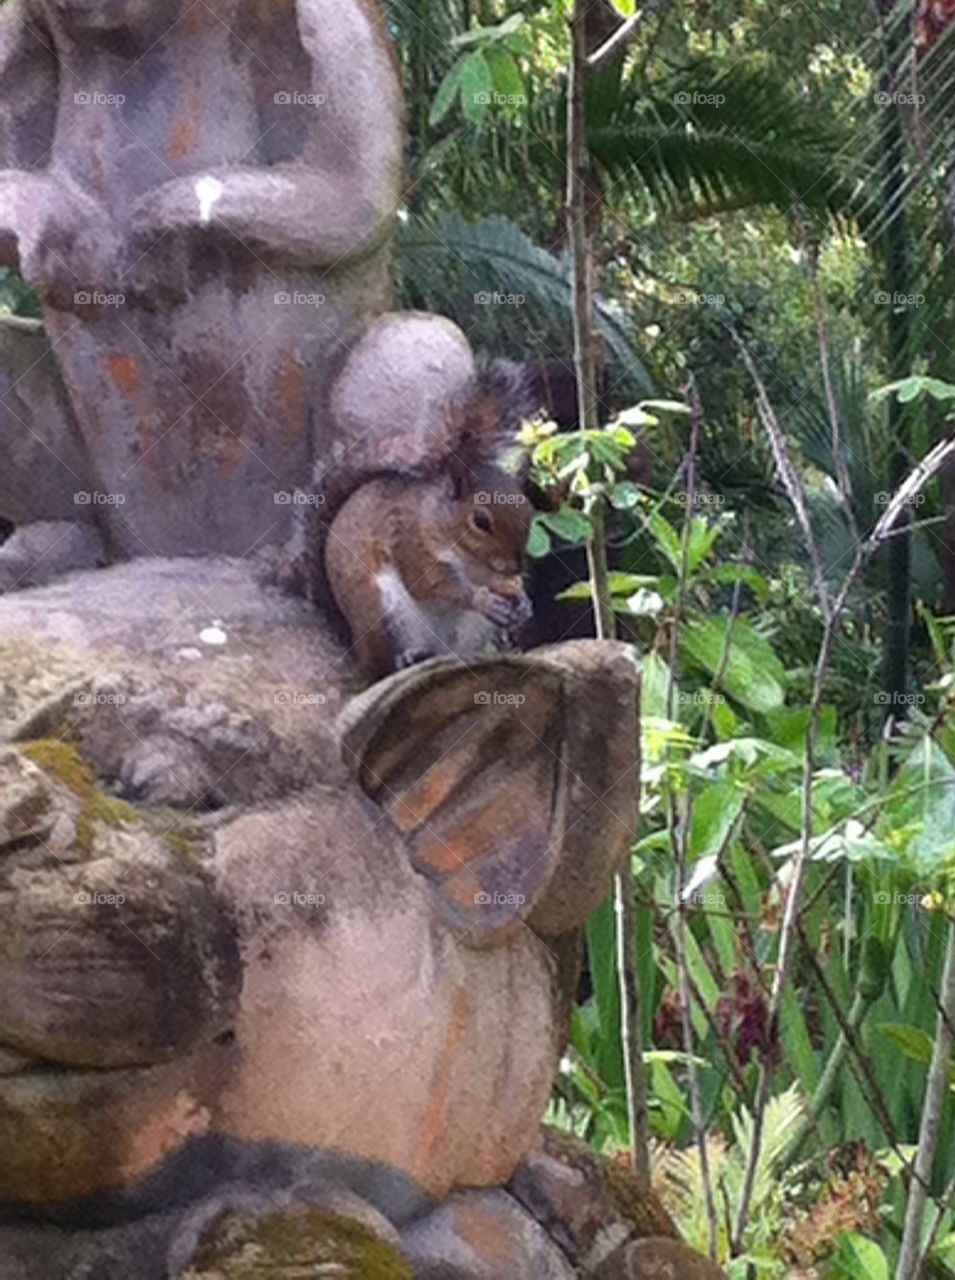 Squirrel Whispering In Statues Ear